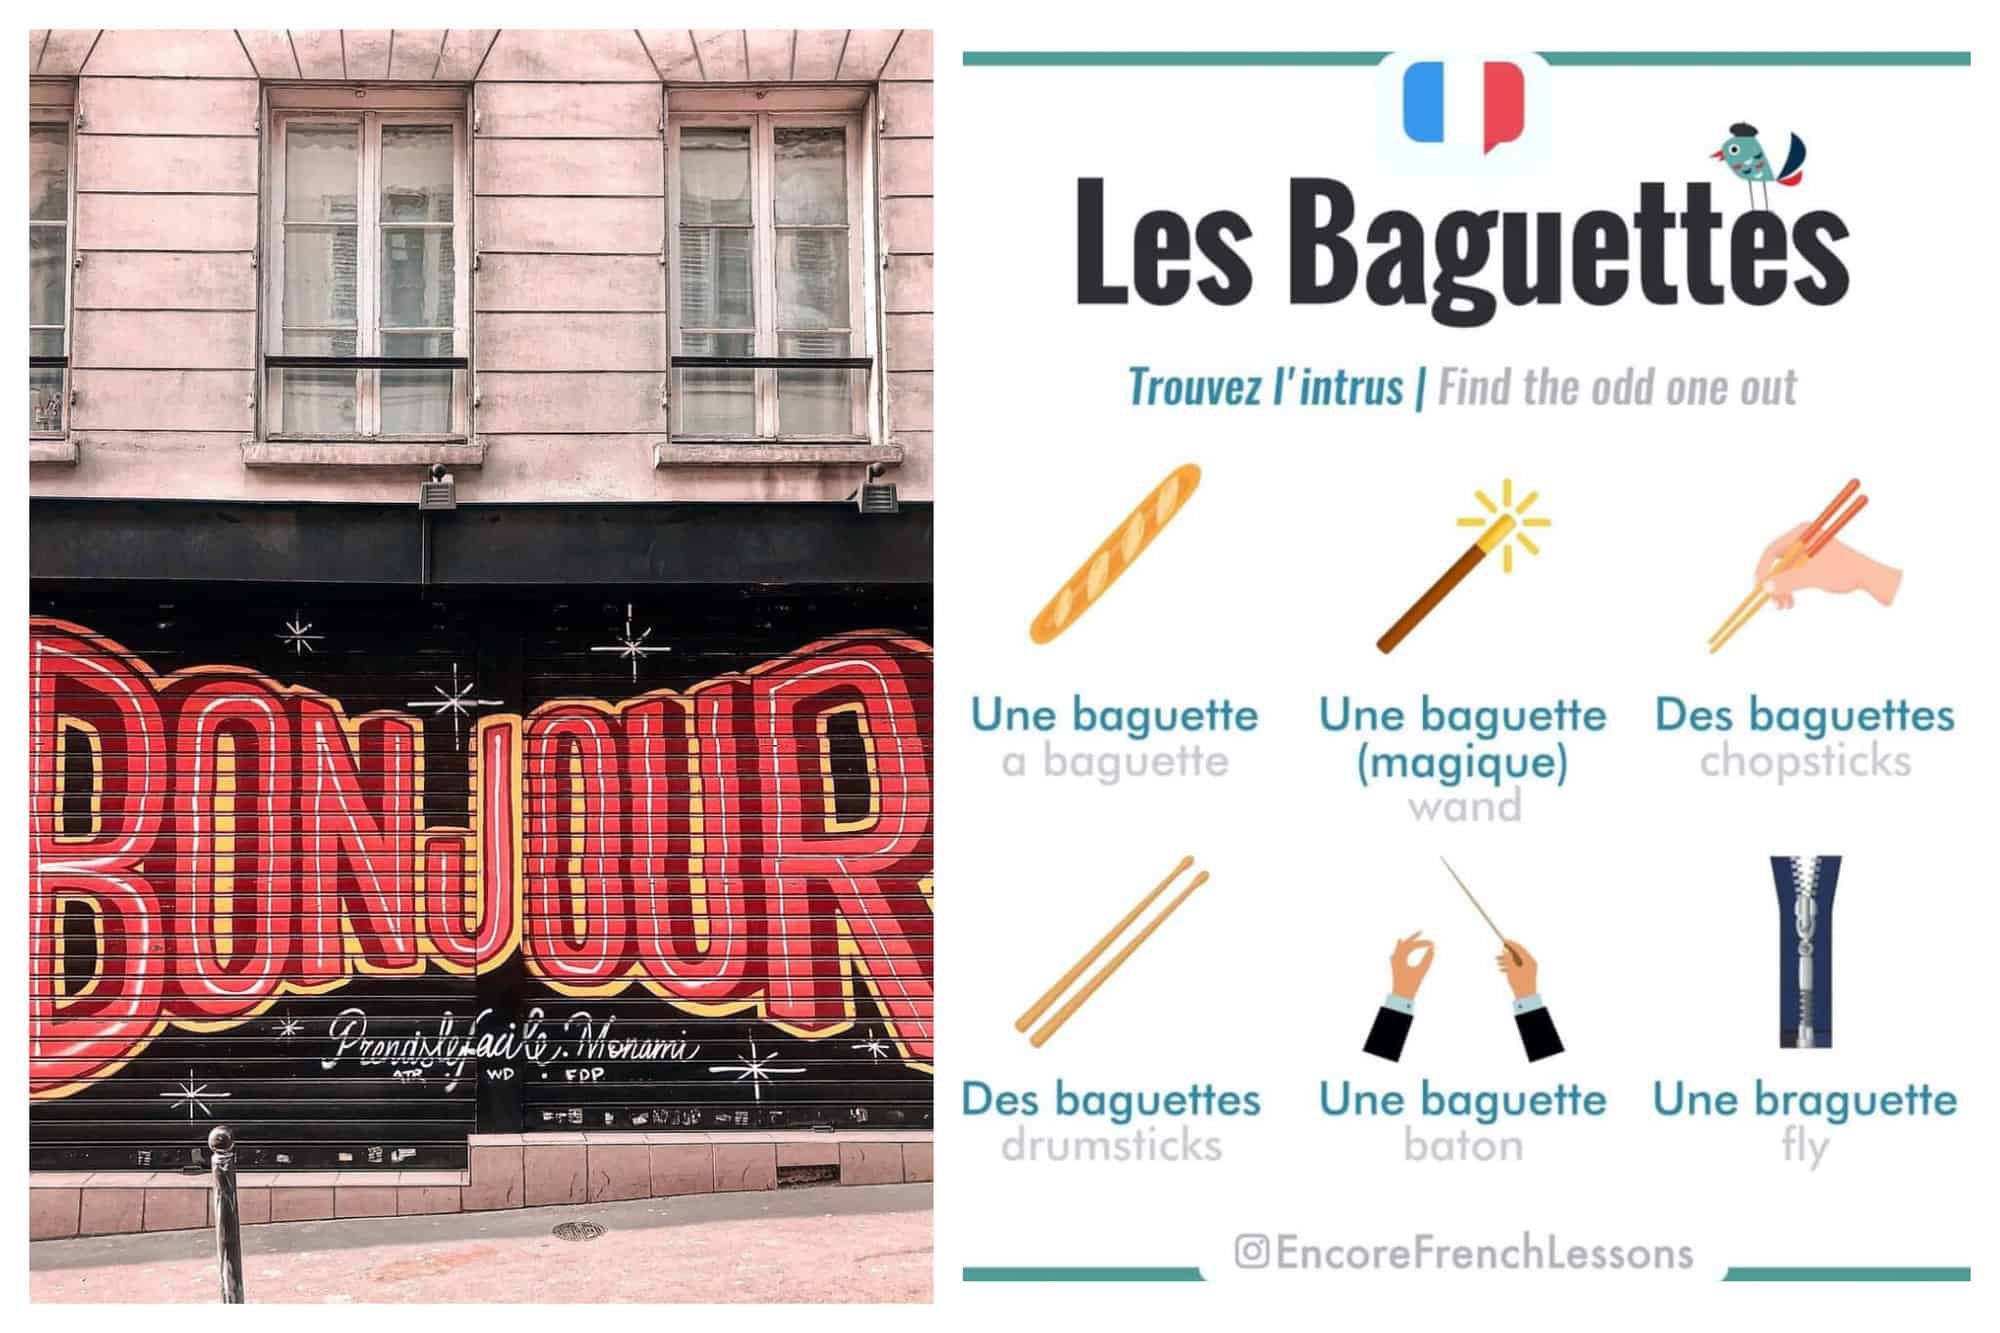 left: a wall in paris with bonjour written on it with large pink and yellow letters. this is painted on a black background. right: a still frm an funny infograph made by Encore French Lessons about the different meanings of les baguettes in French.